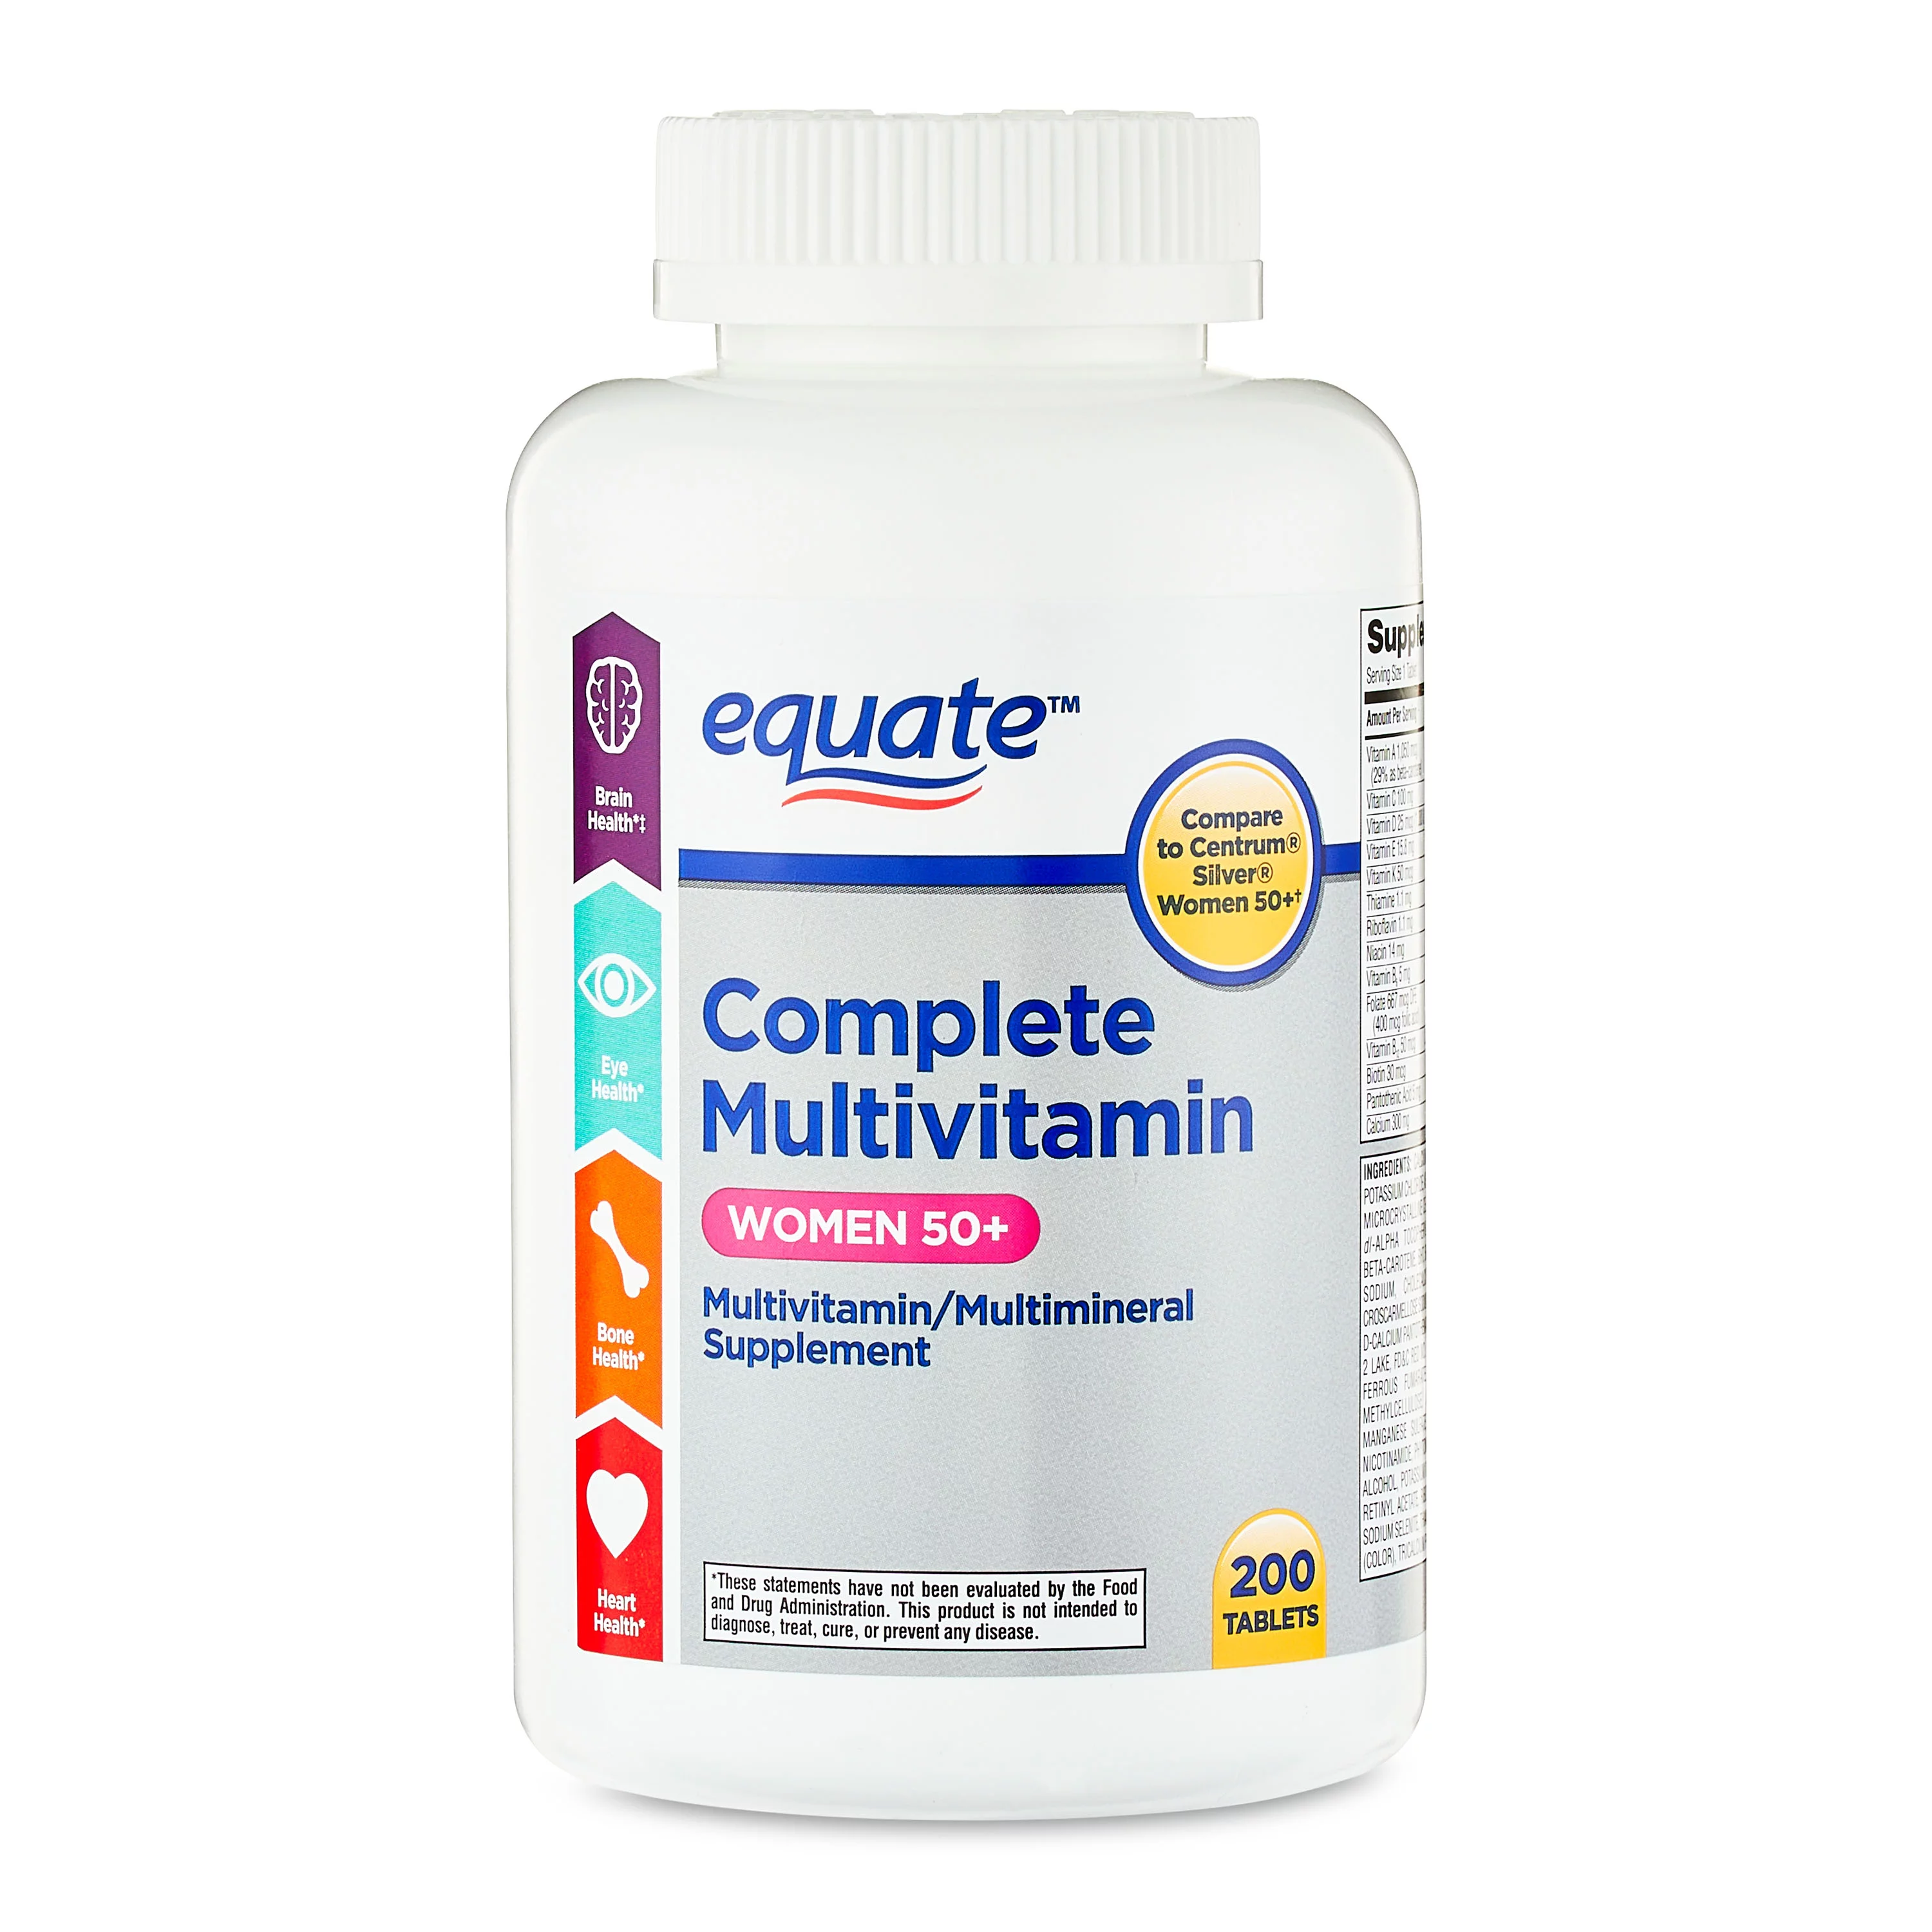 Equate Complete Multivitamin/Multimineral Supplement Tablets, Women 50+, 200 Count